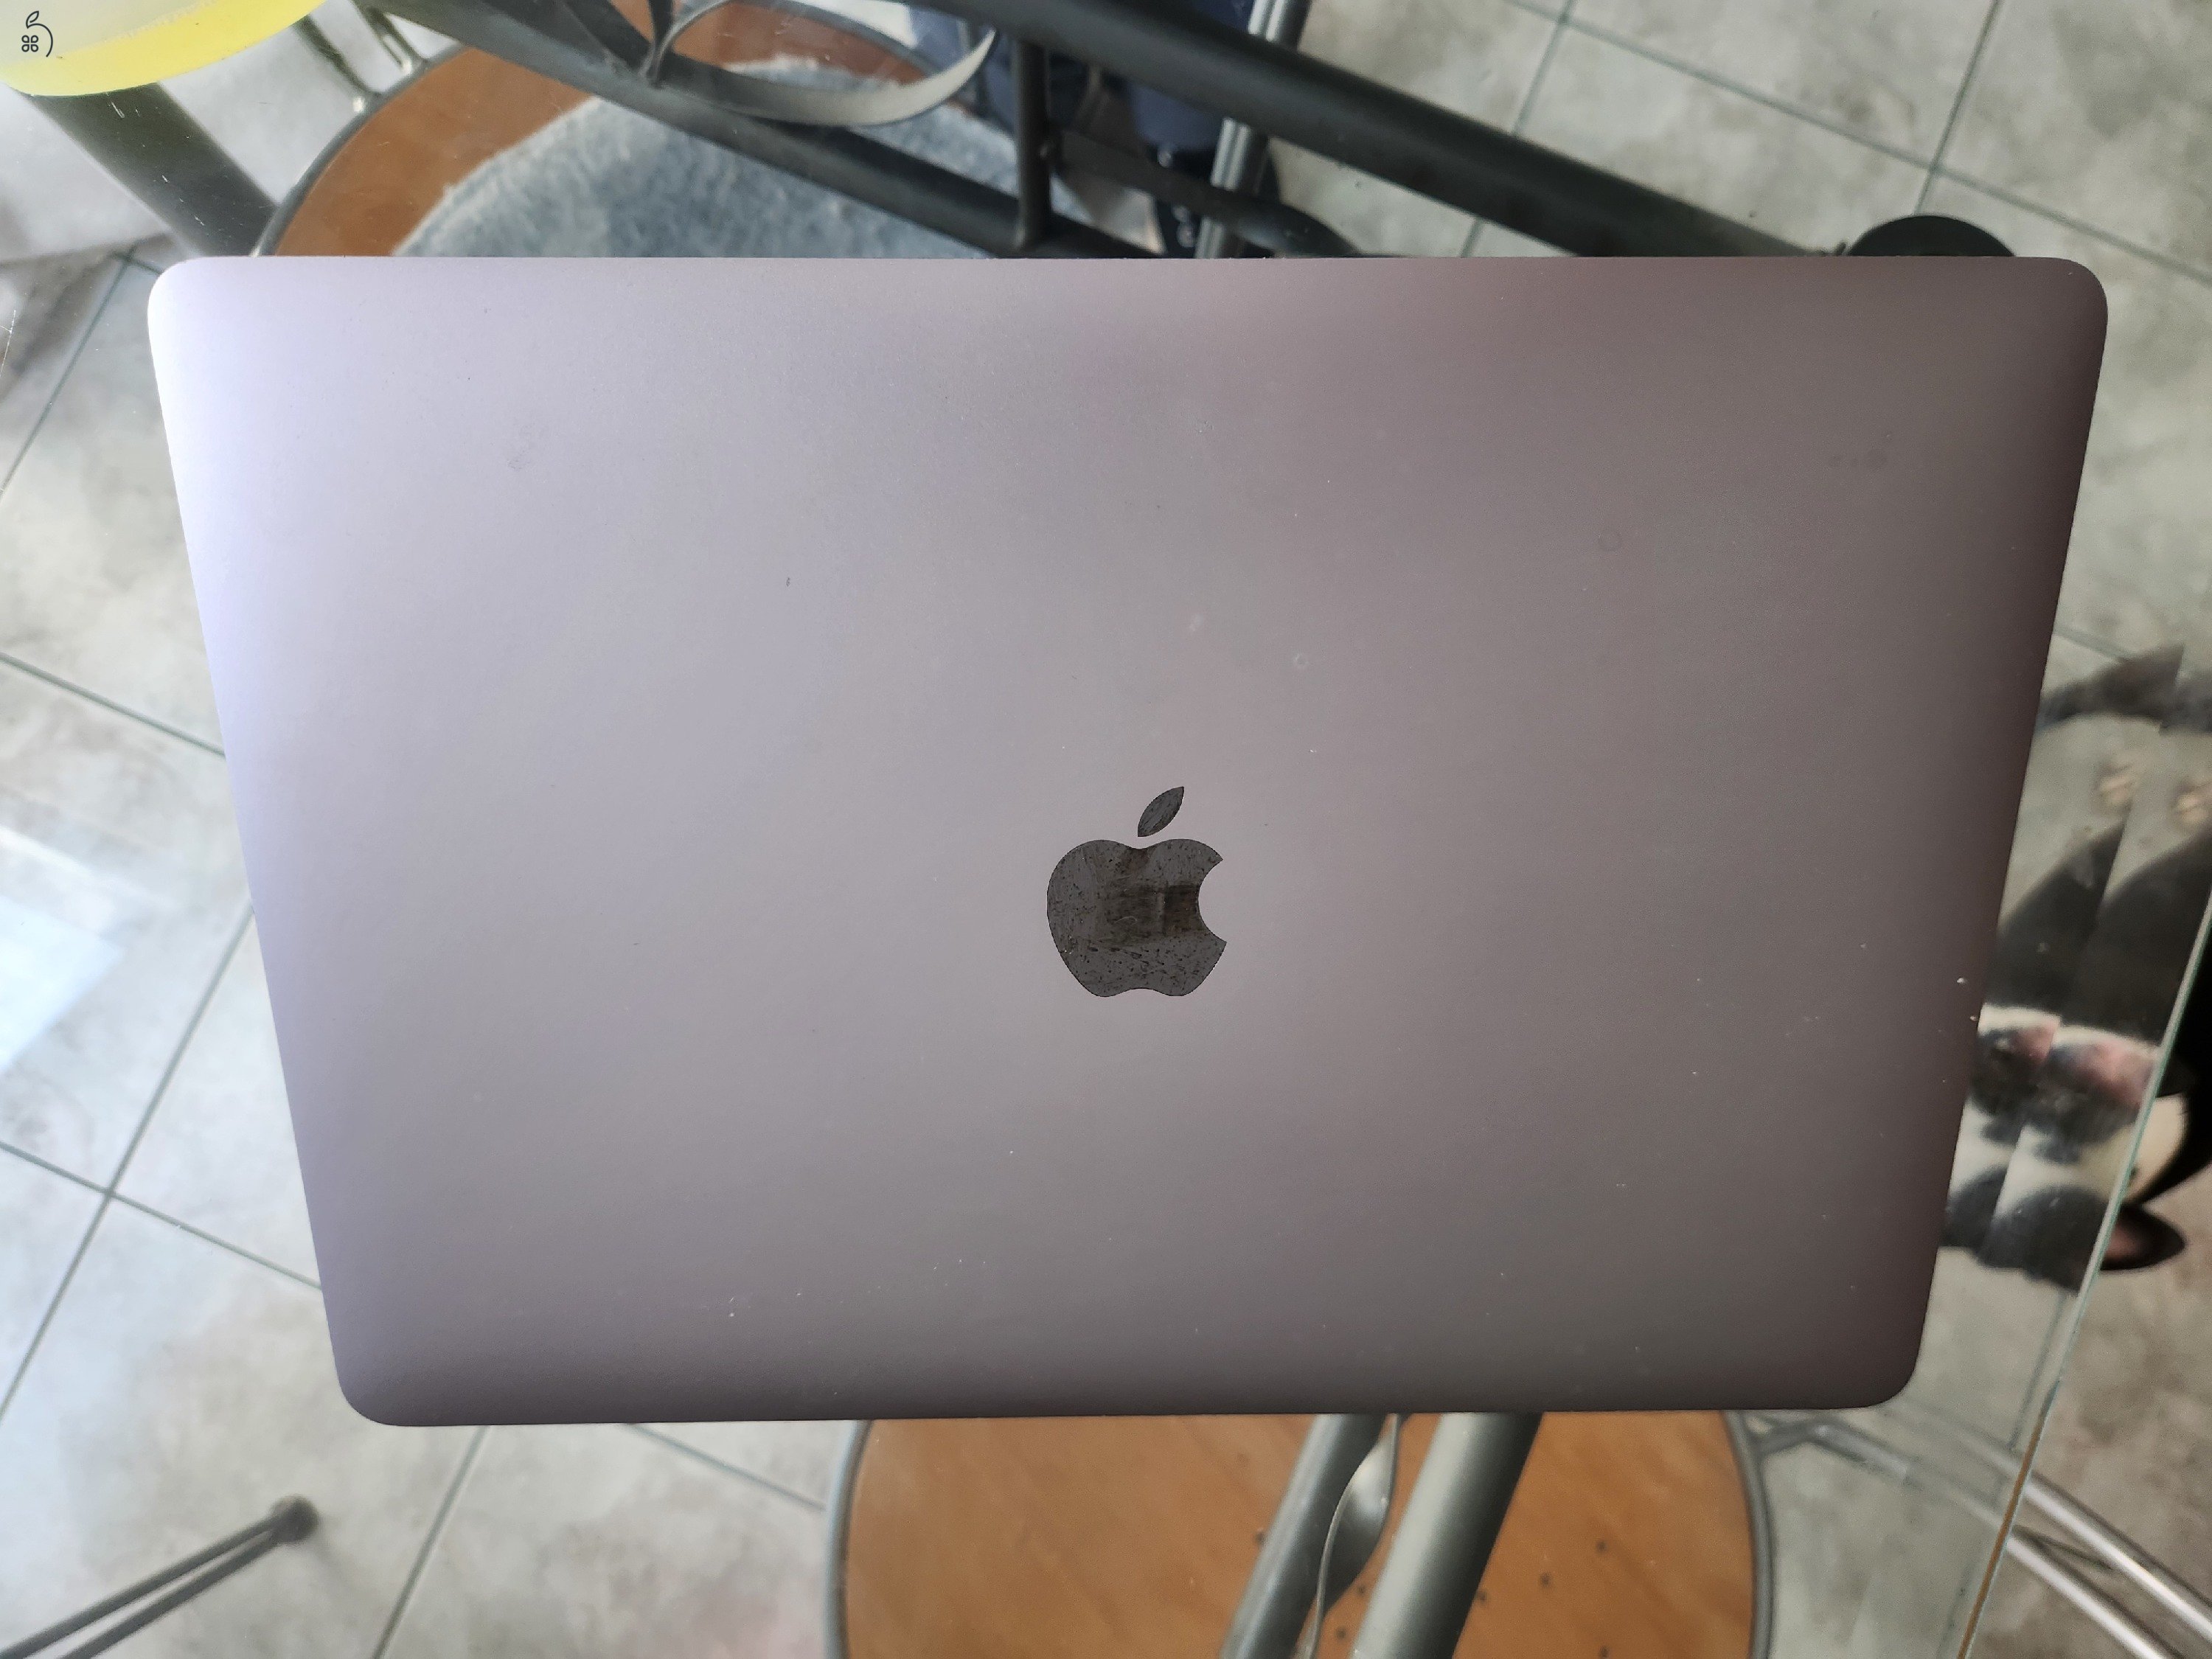 MacBook Pro Touch Bar 2,9 Ghz Core i5 256 GB SSD 8 GB